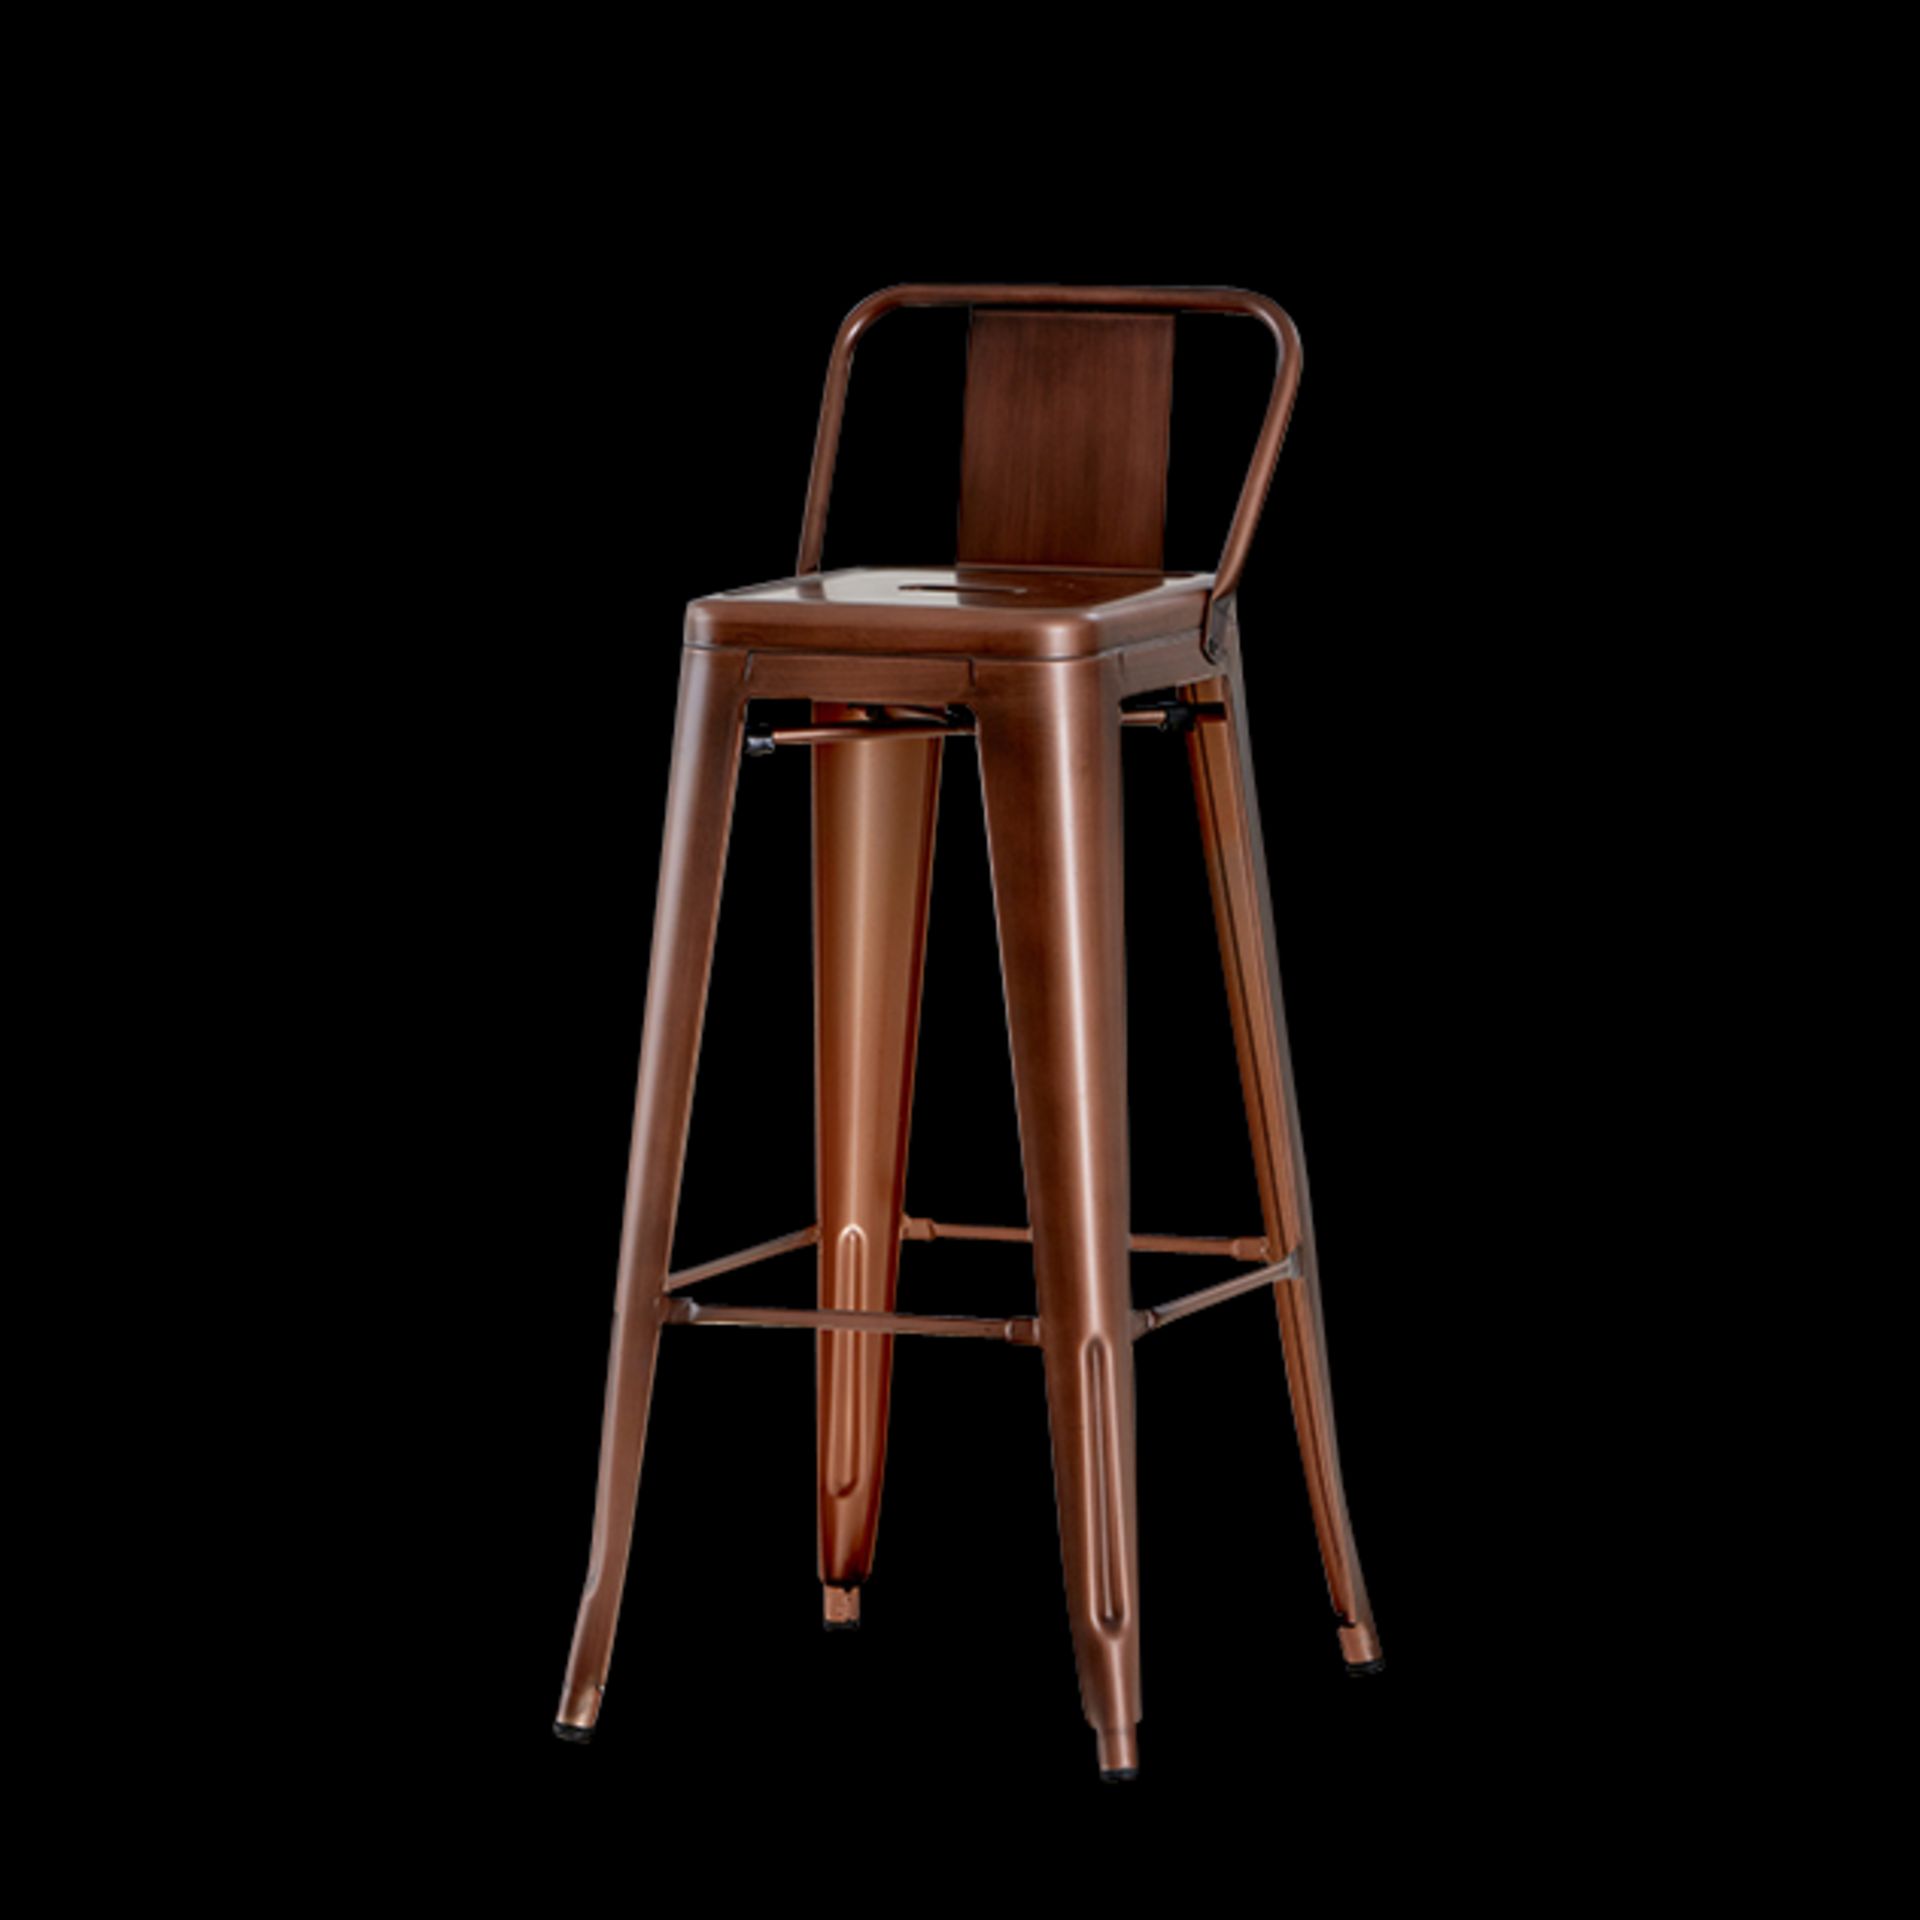 4 x Industrial Tolix Style Stackable Bar Stools With Backrests - Finish: COPPER - Ideal For Bistros, - Image 3 of 6